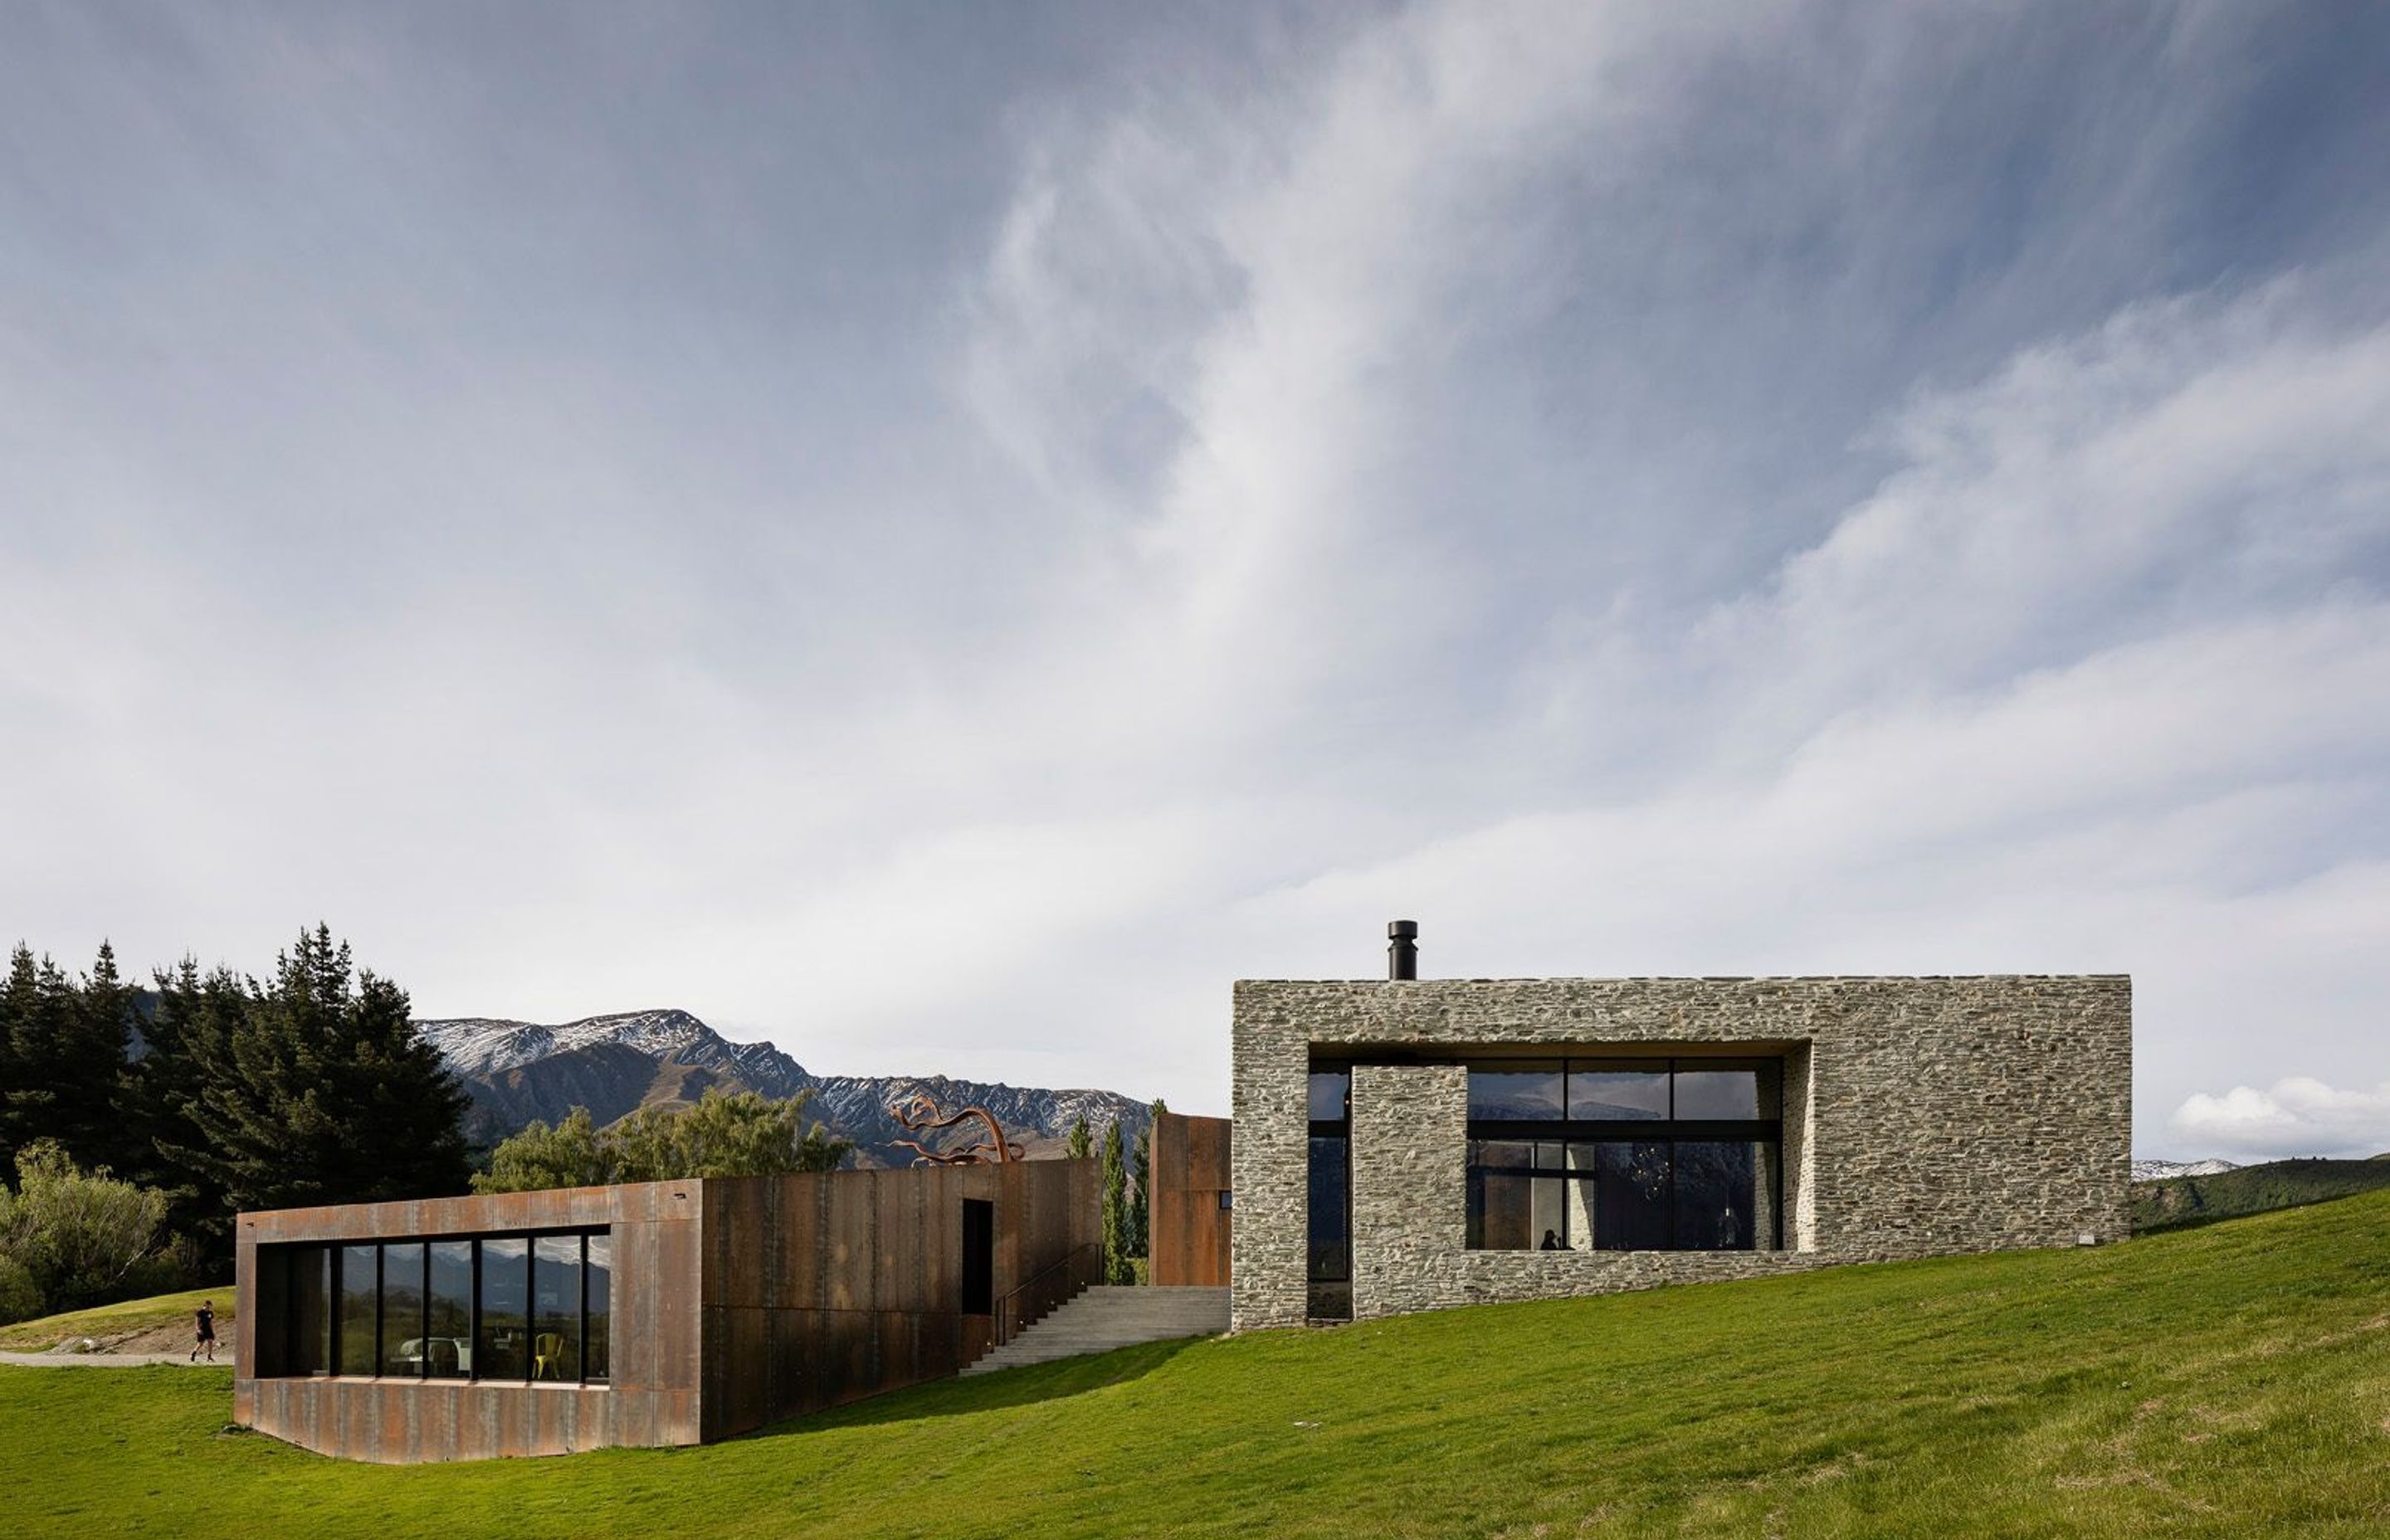 Located in the Wakatipu basin among the Southern Alps, Arrowtown House rises from the landscape. Photography by Patrick Reynolds.